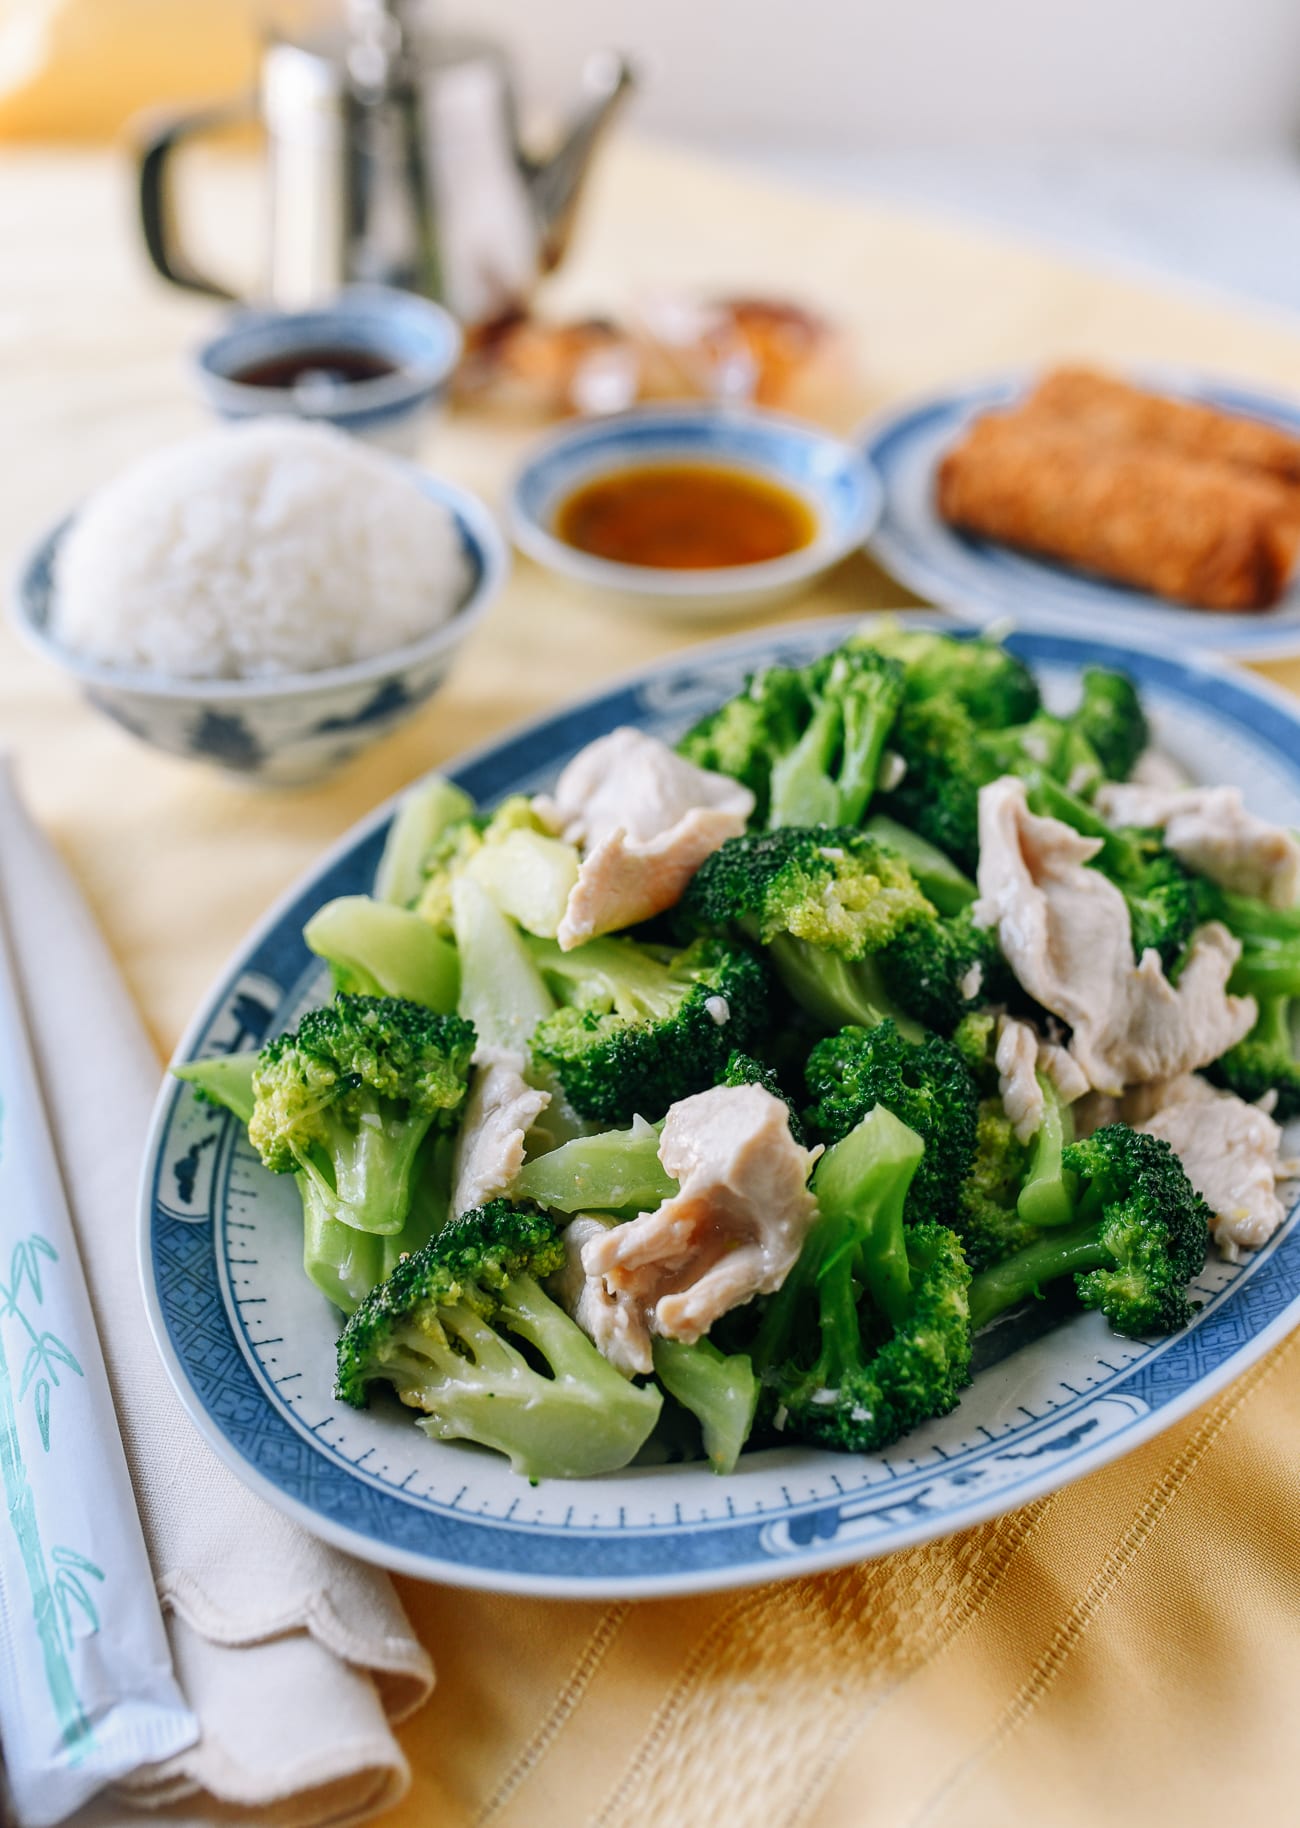 Chicken & Broccoli with White Sauce